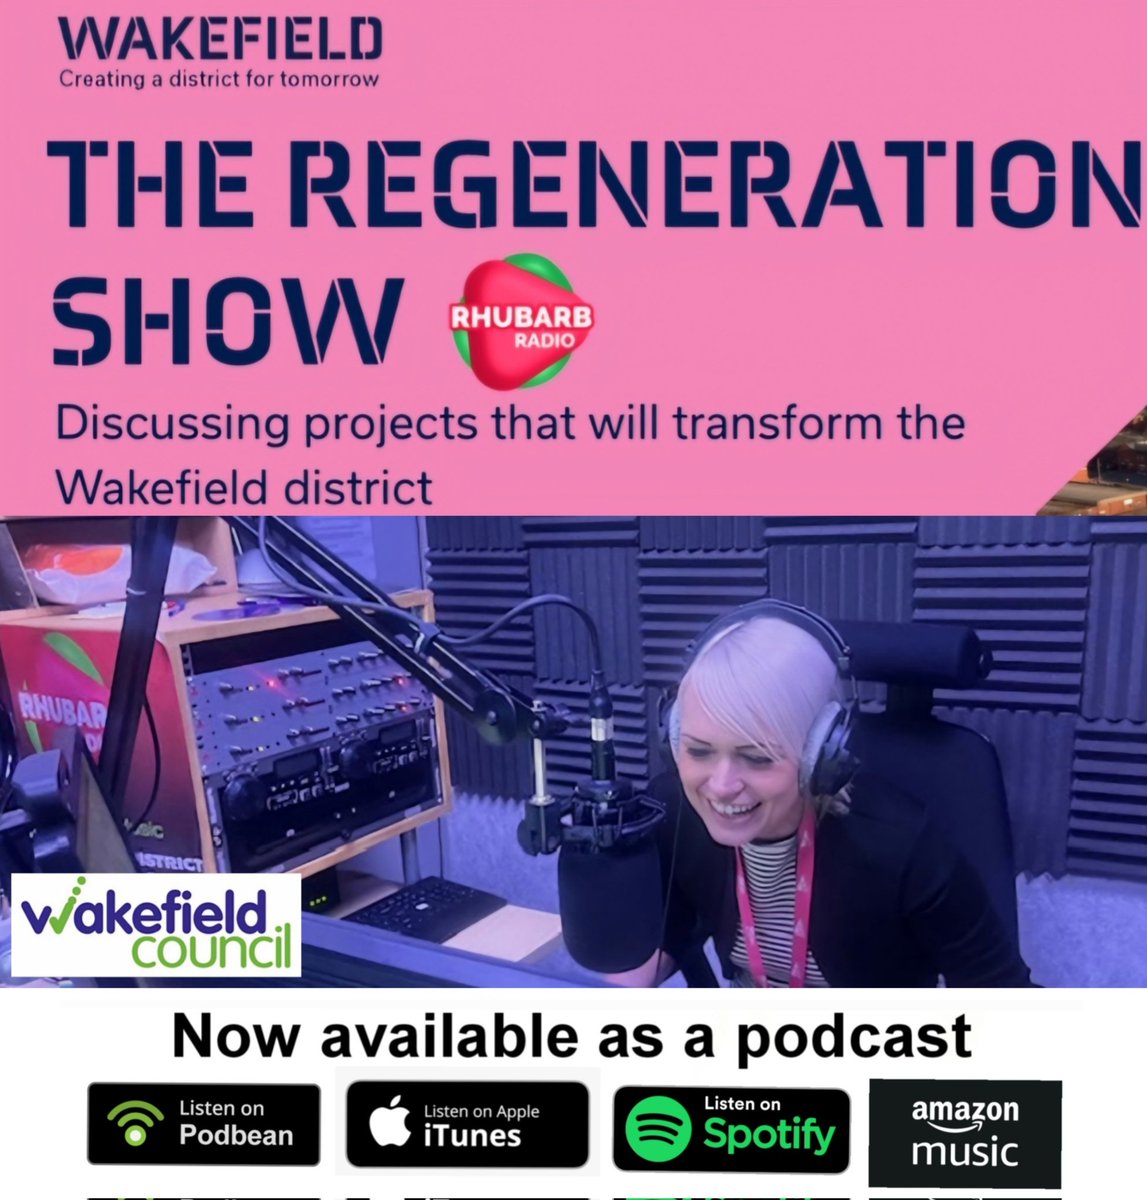 🎙Regeneration isn't just about buildings and improving public spaces, there is also human regeneration, and if you missed the Regeneration Show broadcast on Rhubarb Radio, you can listen on The Rhubarb Radio Podcast 🙏🏼 #regeneration #WFRegenShow @MyWakefield @Wakefieldfirst